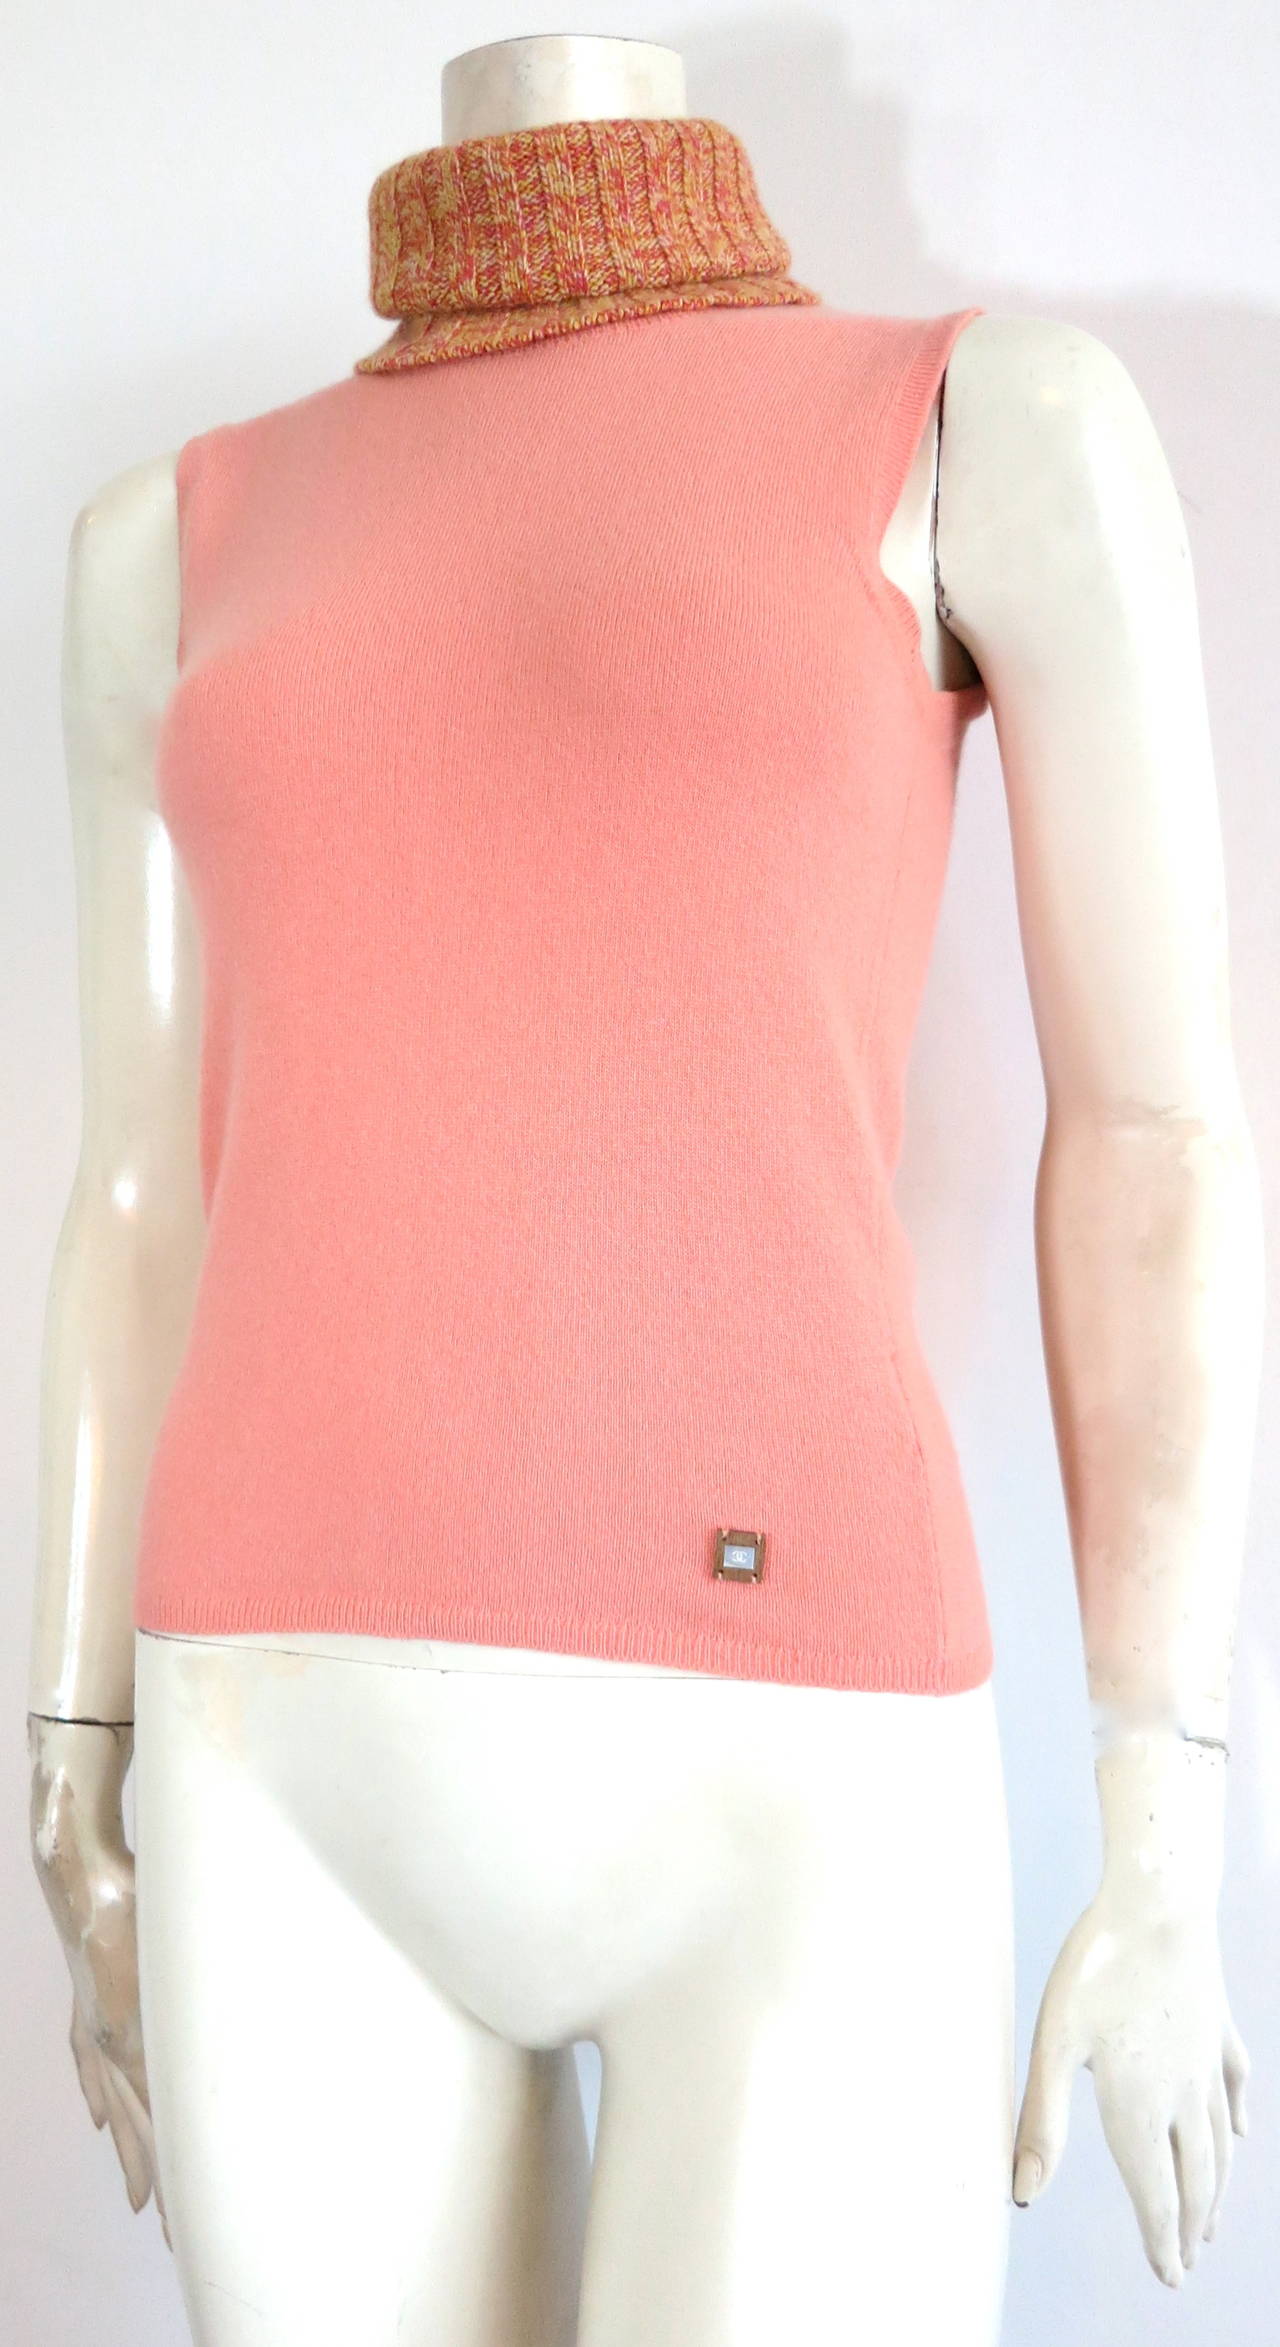 Excellent condition, CHANEL PARIS, pure apricot cashmere, sleeveless turtle-neck sweater.

Luxuriously soft hand-feel with beautiful, multi-color, melange ribbed, sweater knit neck panel.  The neck panel is 12